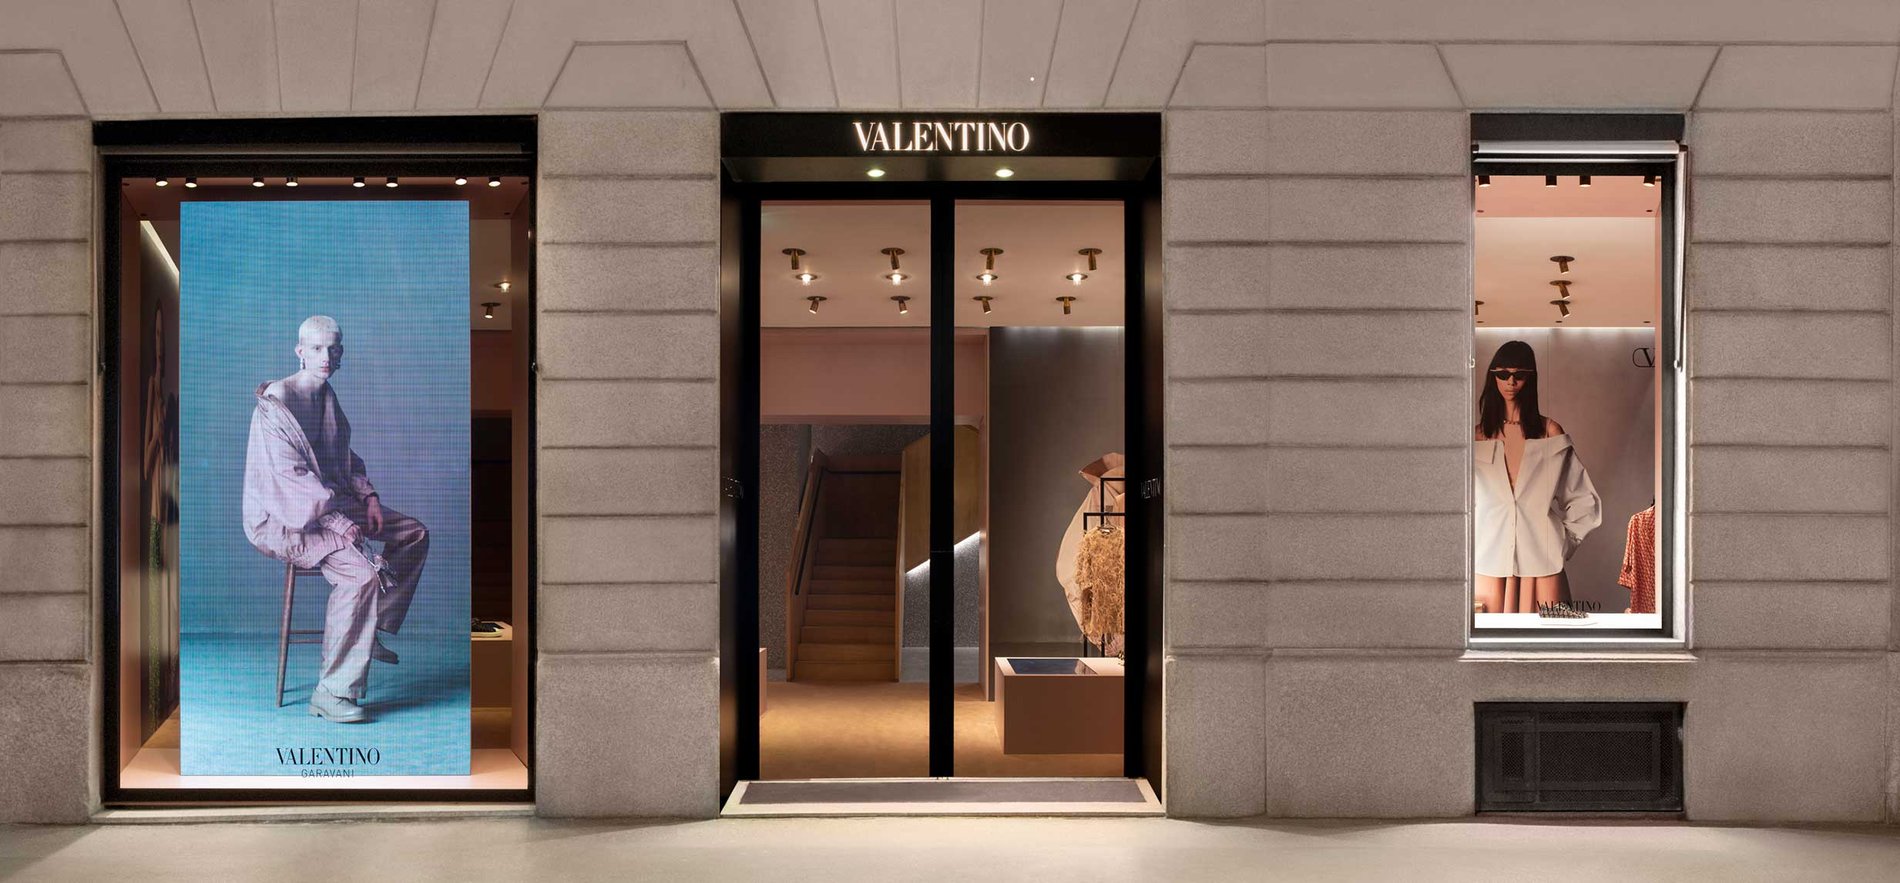 Valentino The Dubai Mall Man: Women and men collections, clothing, bags ...